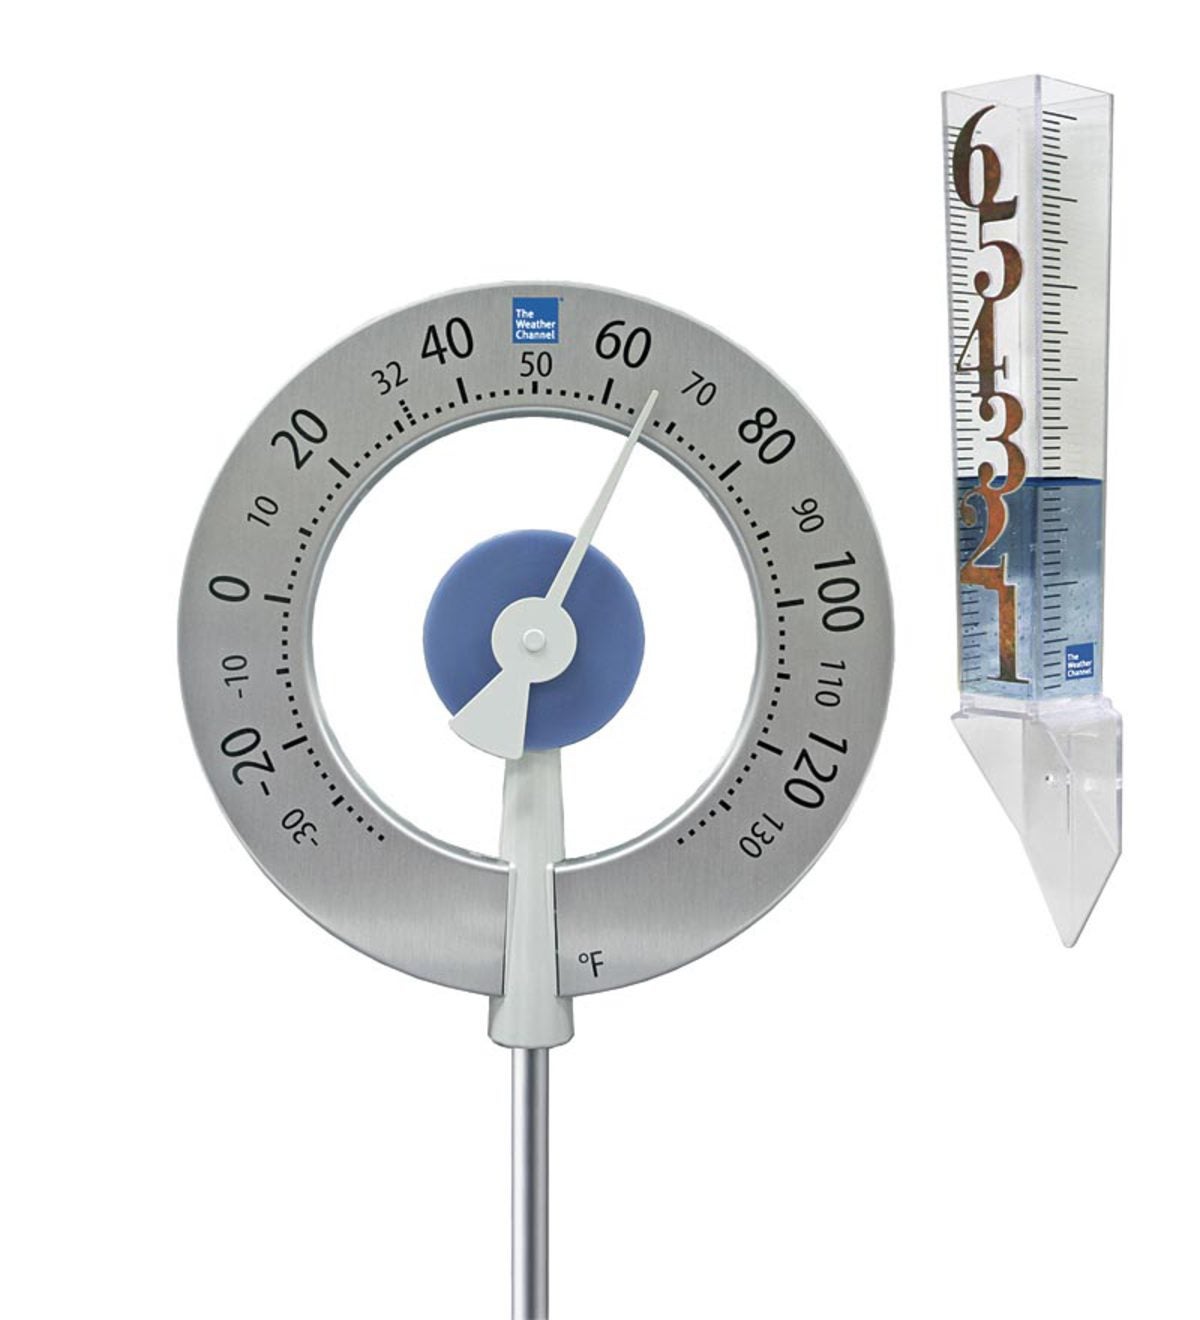 La Crosse Technology Outdoor Thermometers 